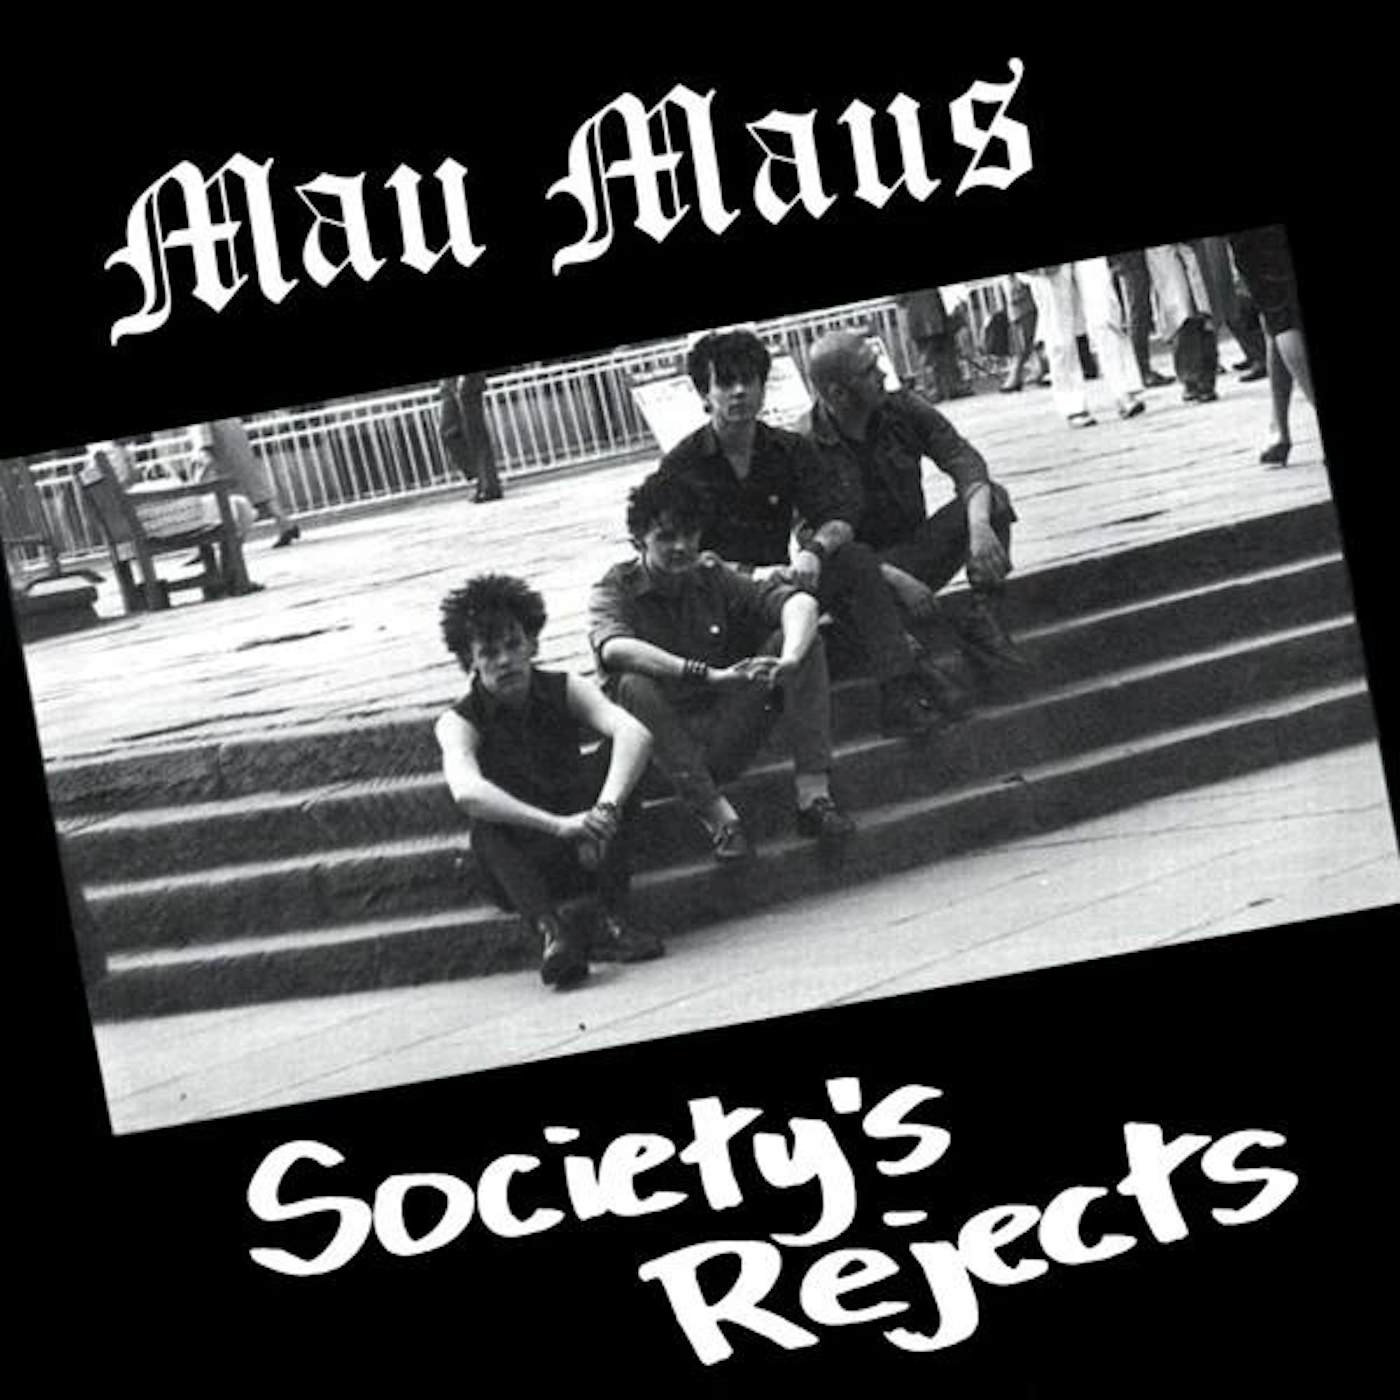 The Mau Maus Society's Rejects Vinyl Record